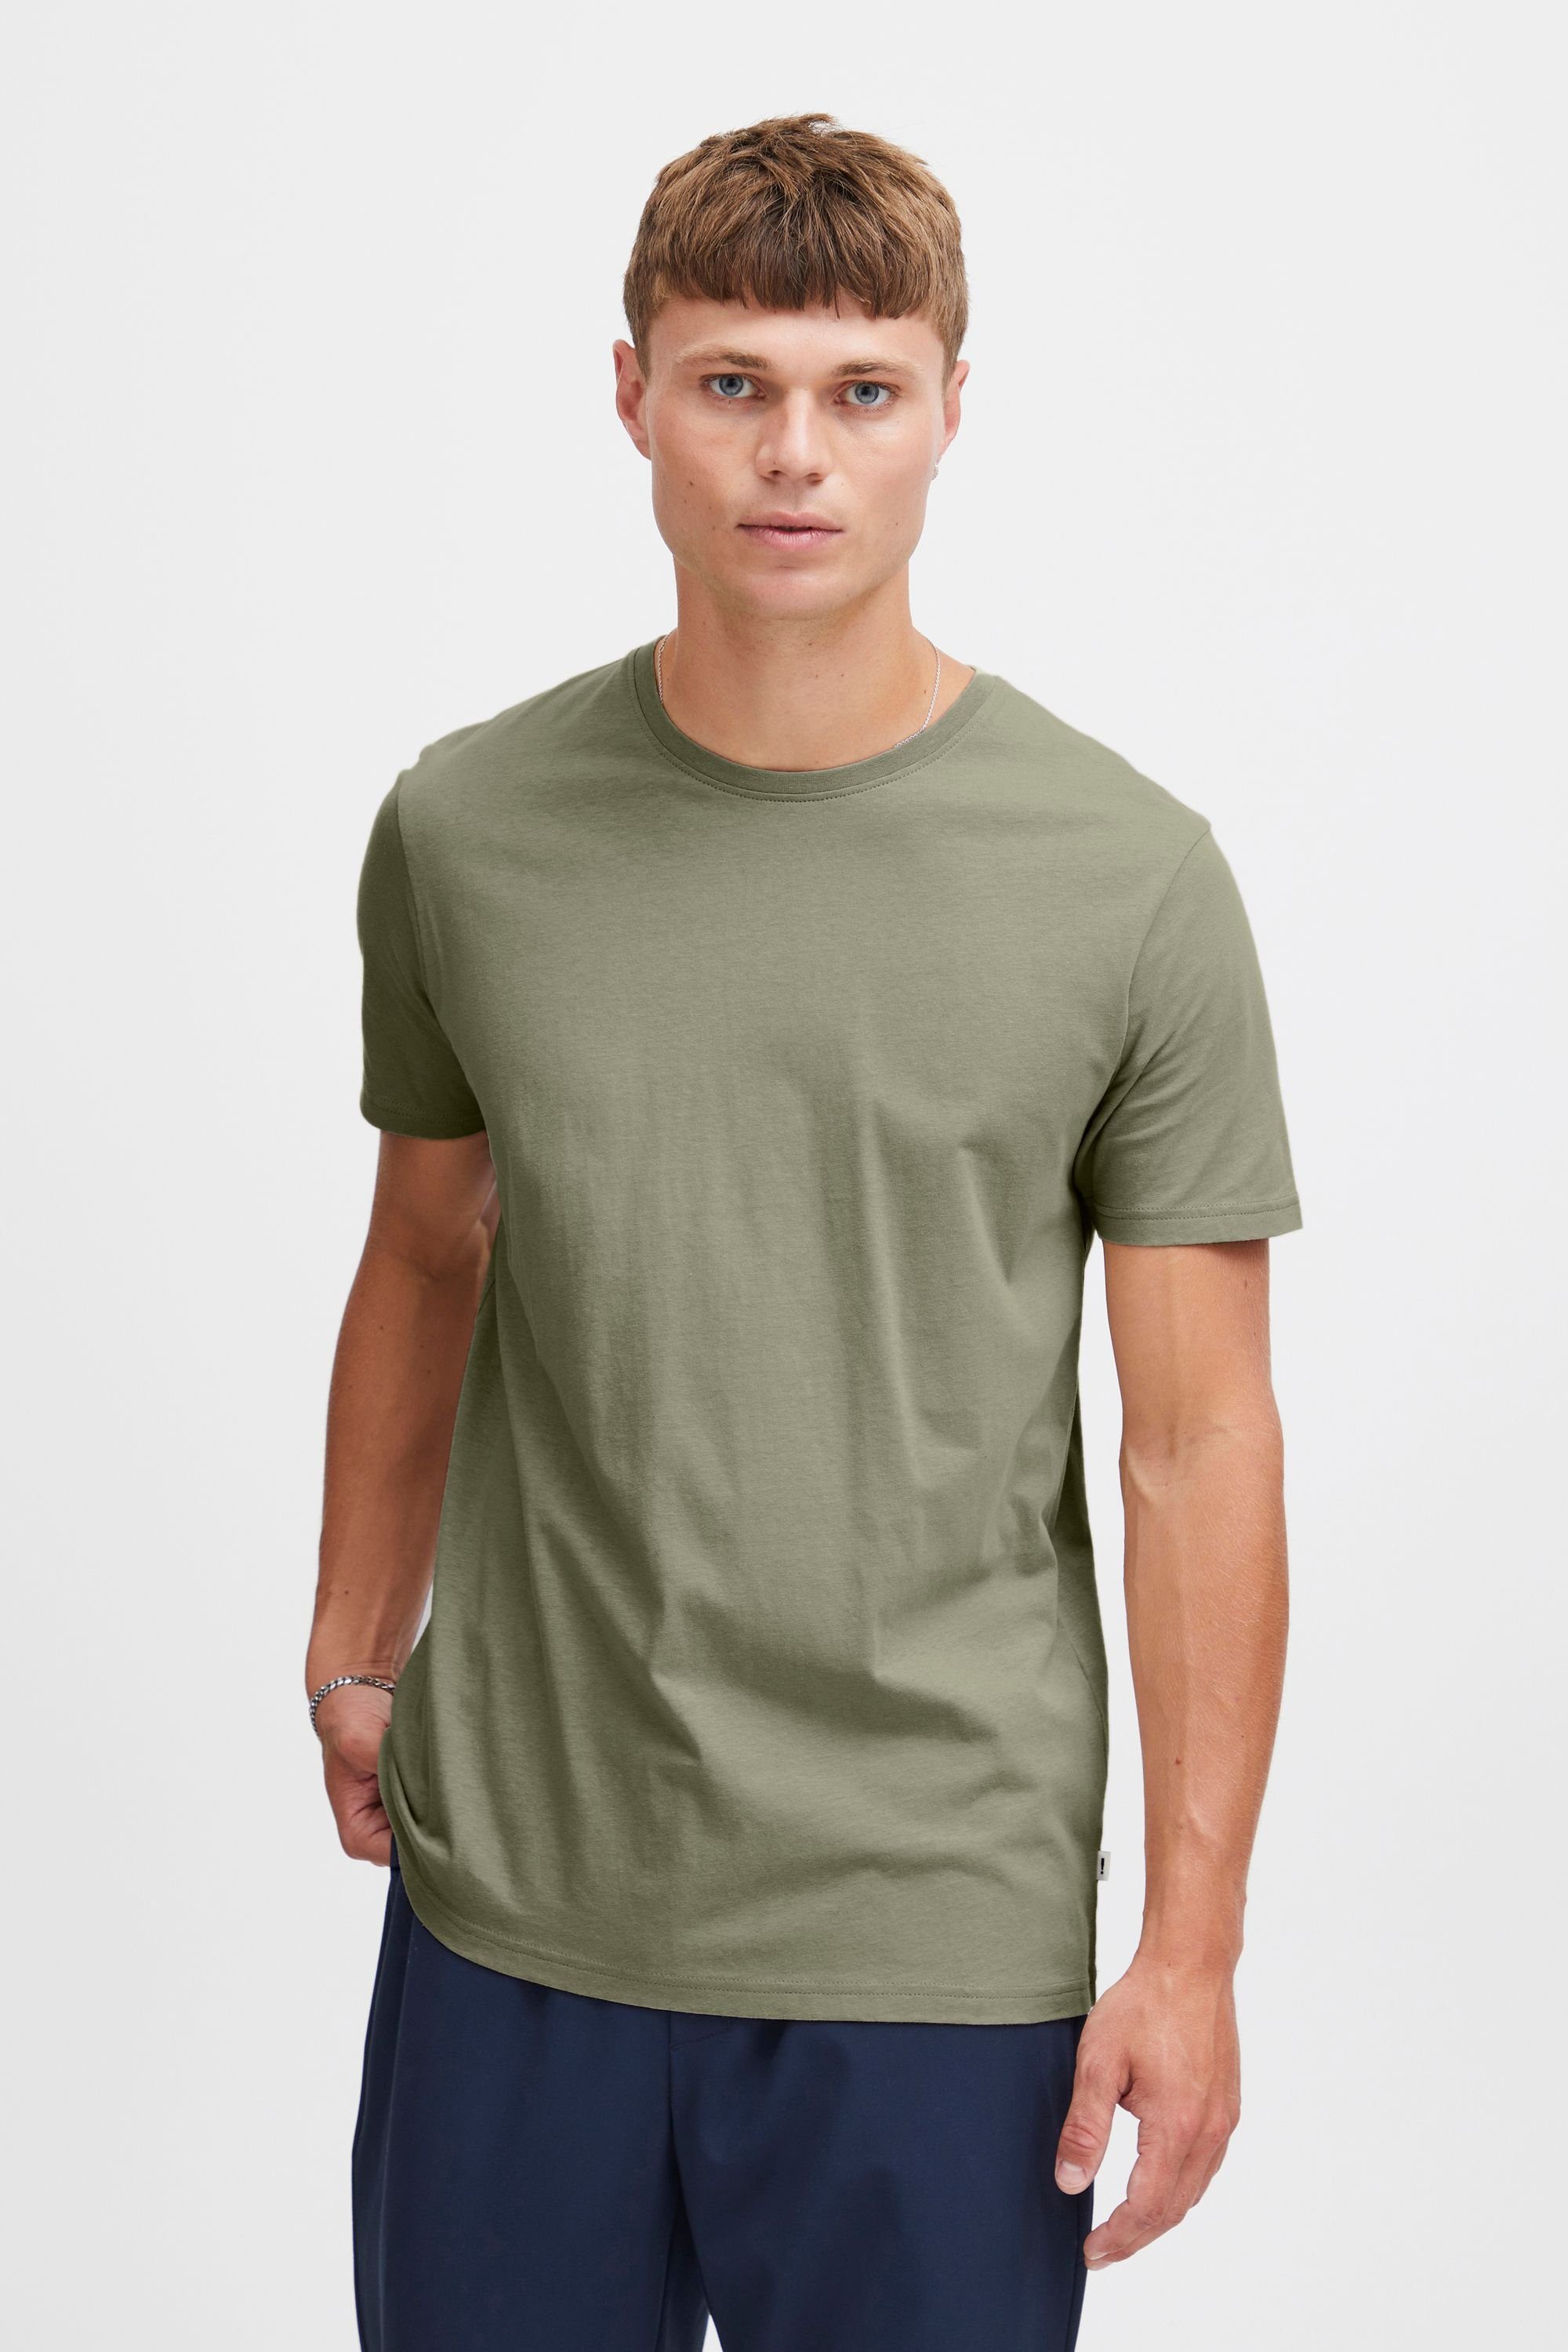 Solid T-Shirt 6194761, Rock SS - - Tee (170613) Vetiver 21103651